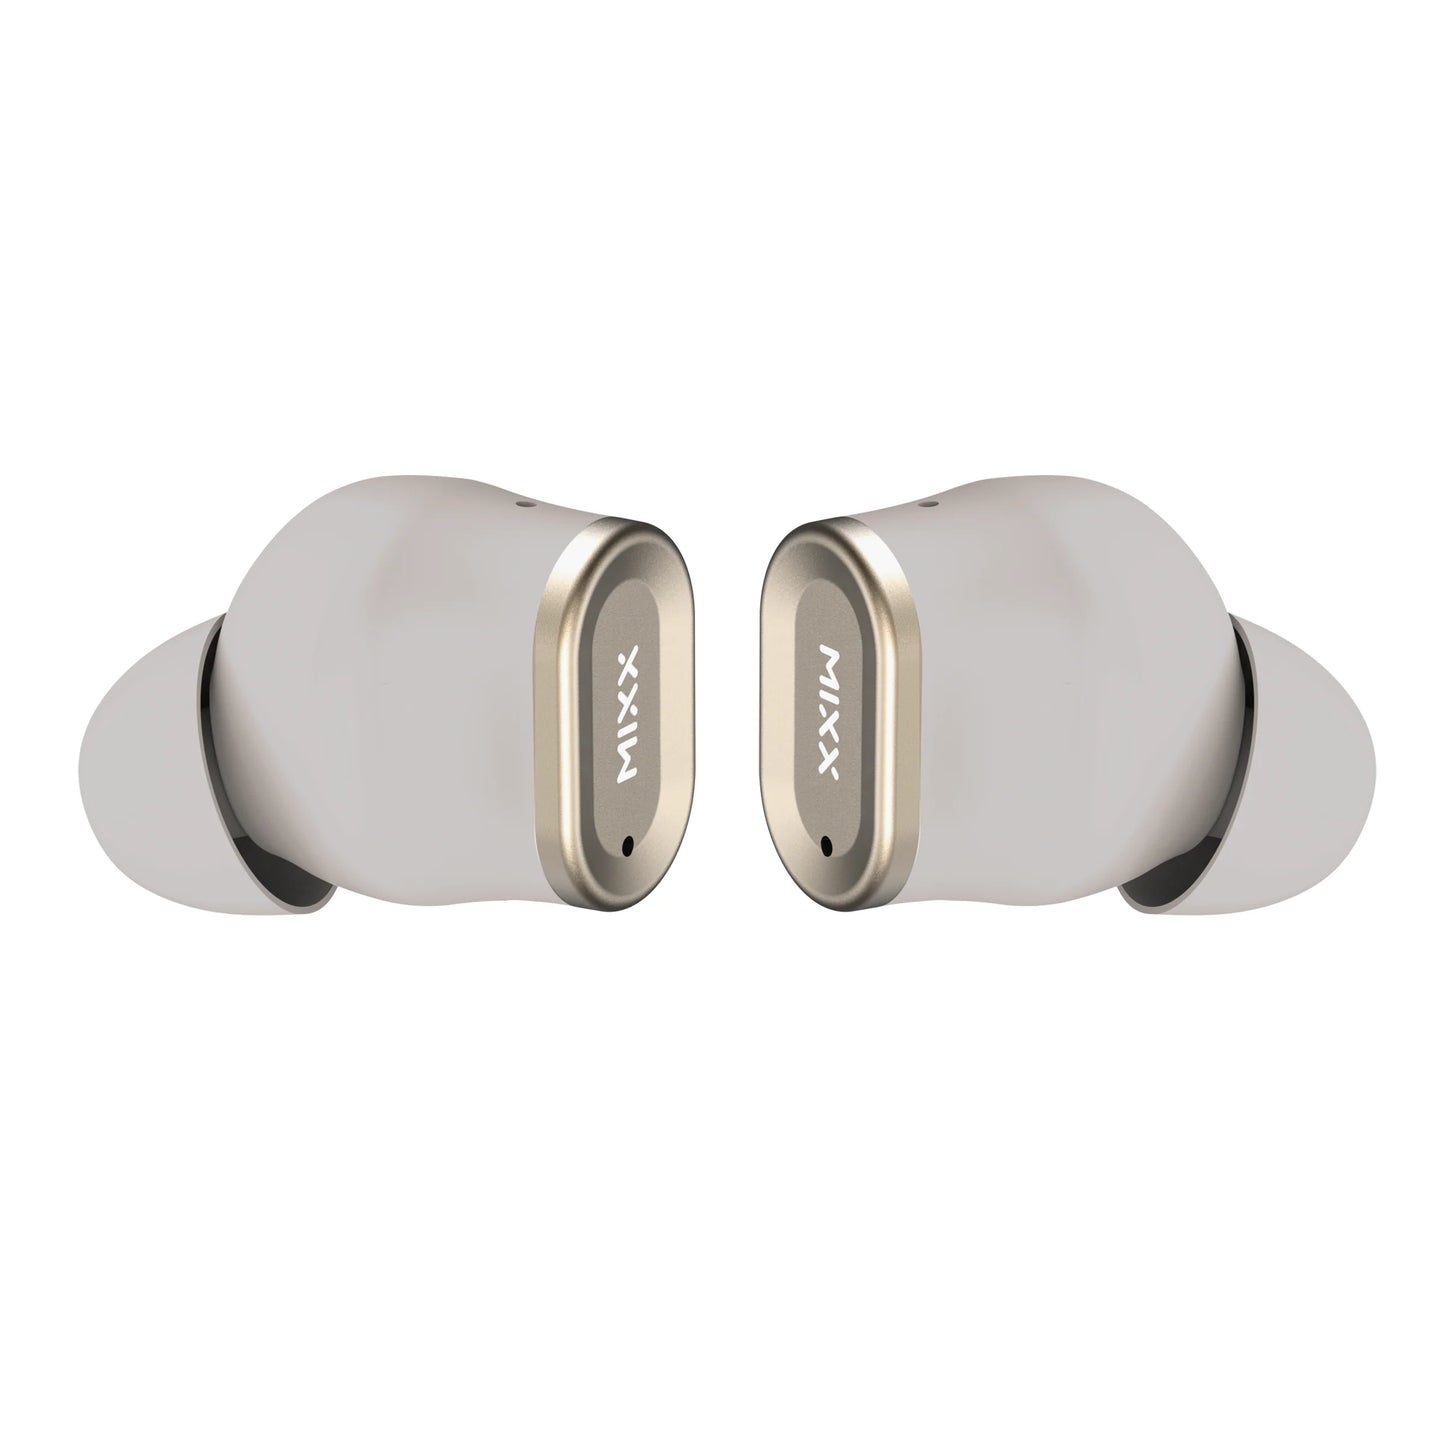 Mixx StreamBuds Custom 1 - True Wireless Earbuds with Charging Case - Unique Capsule Design Bluetooth Earbuds (Champagne Gold)